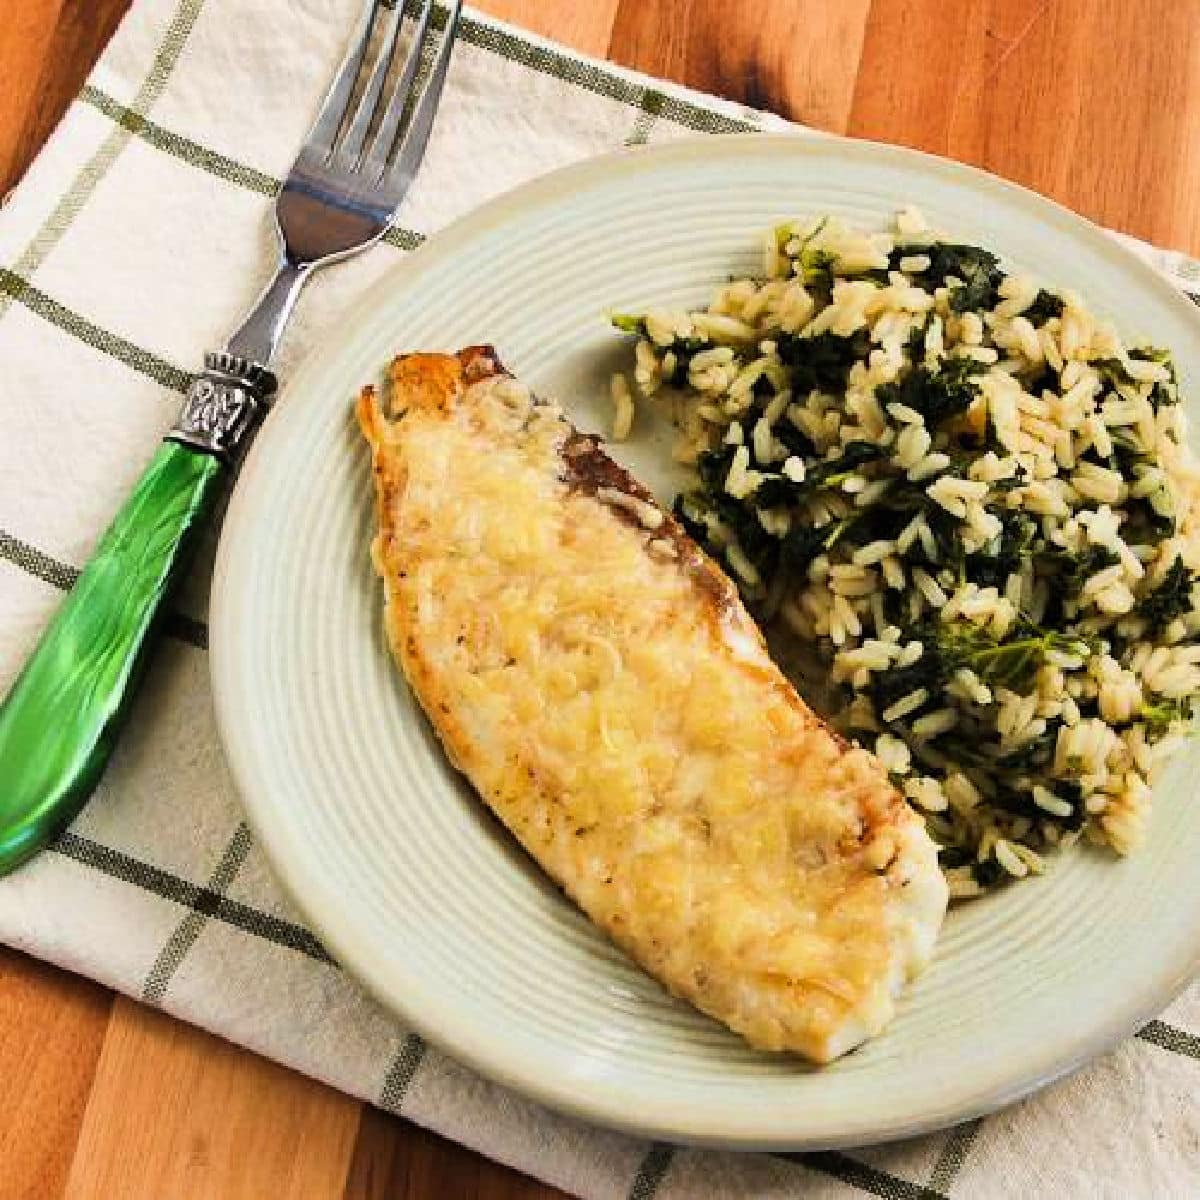 Square image for Parmesan Crusted Fish shown on plate with rice.